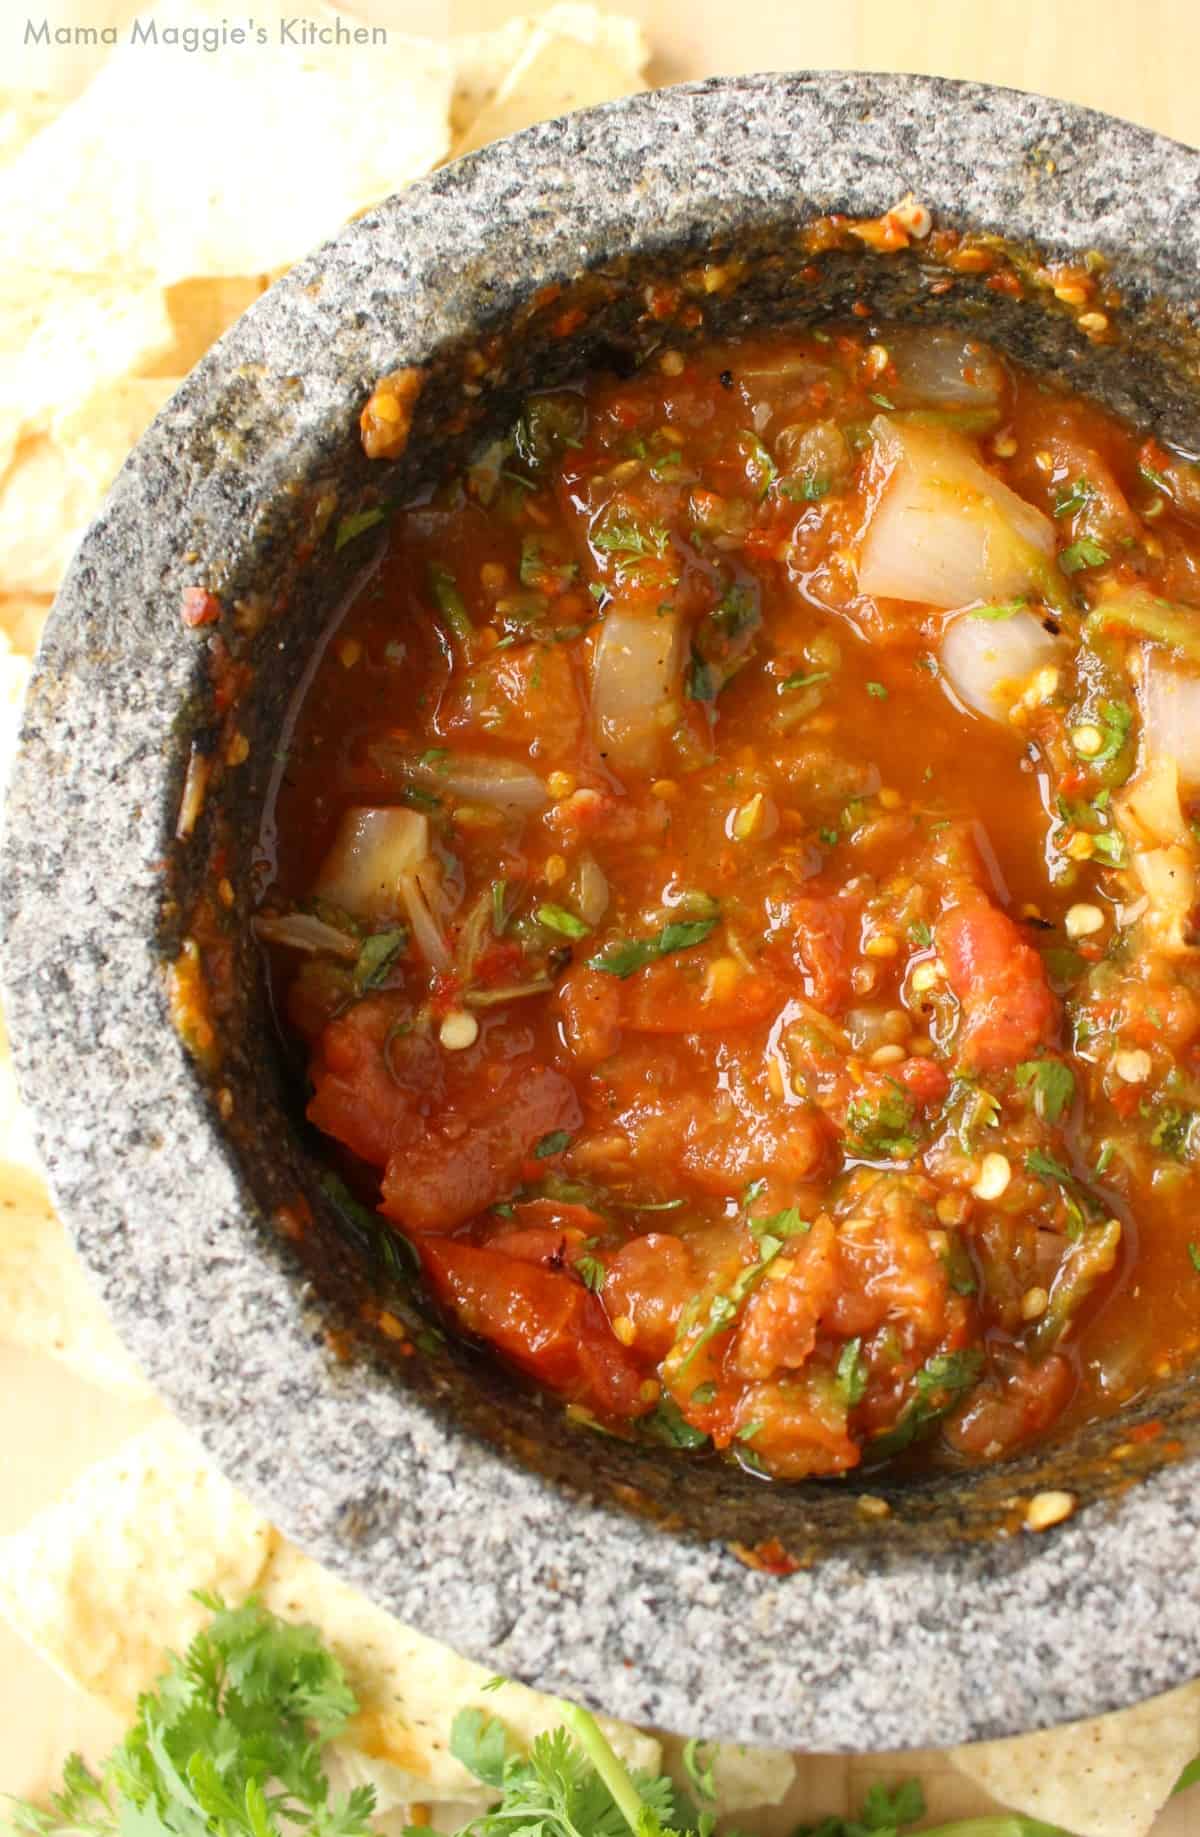 Salsa Chile Piquin in a molcajete surrounded by tortilla chips and green cilantro.